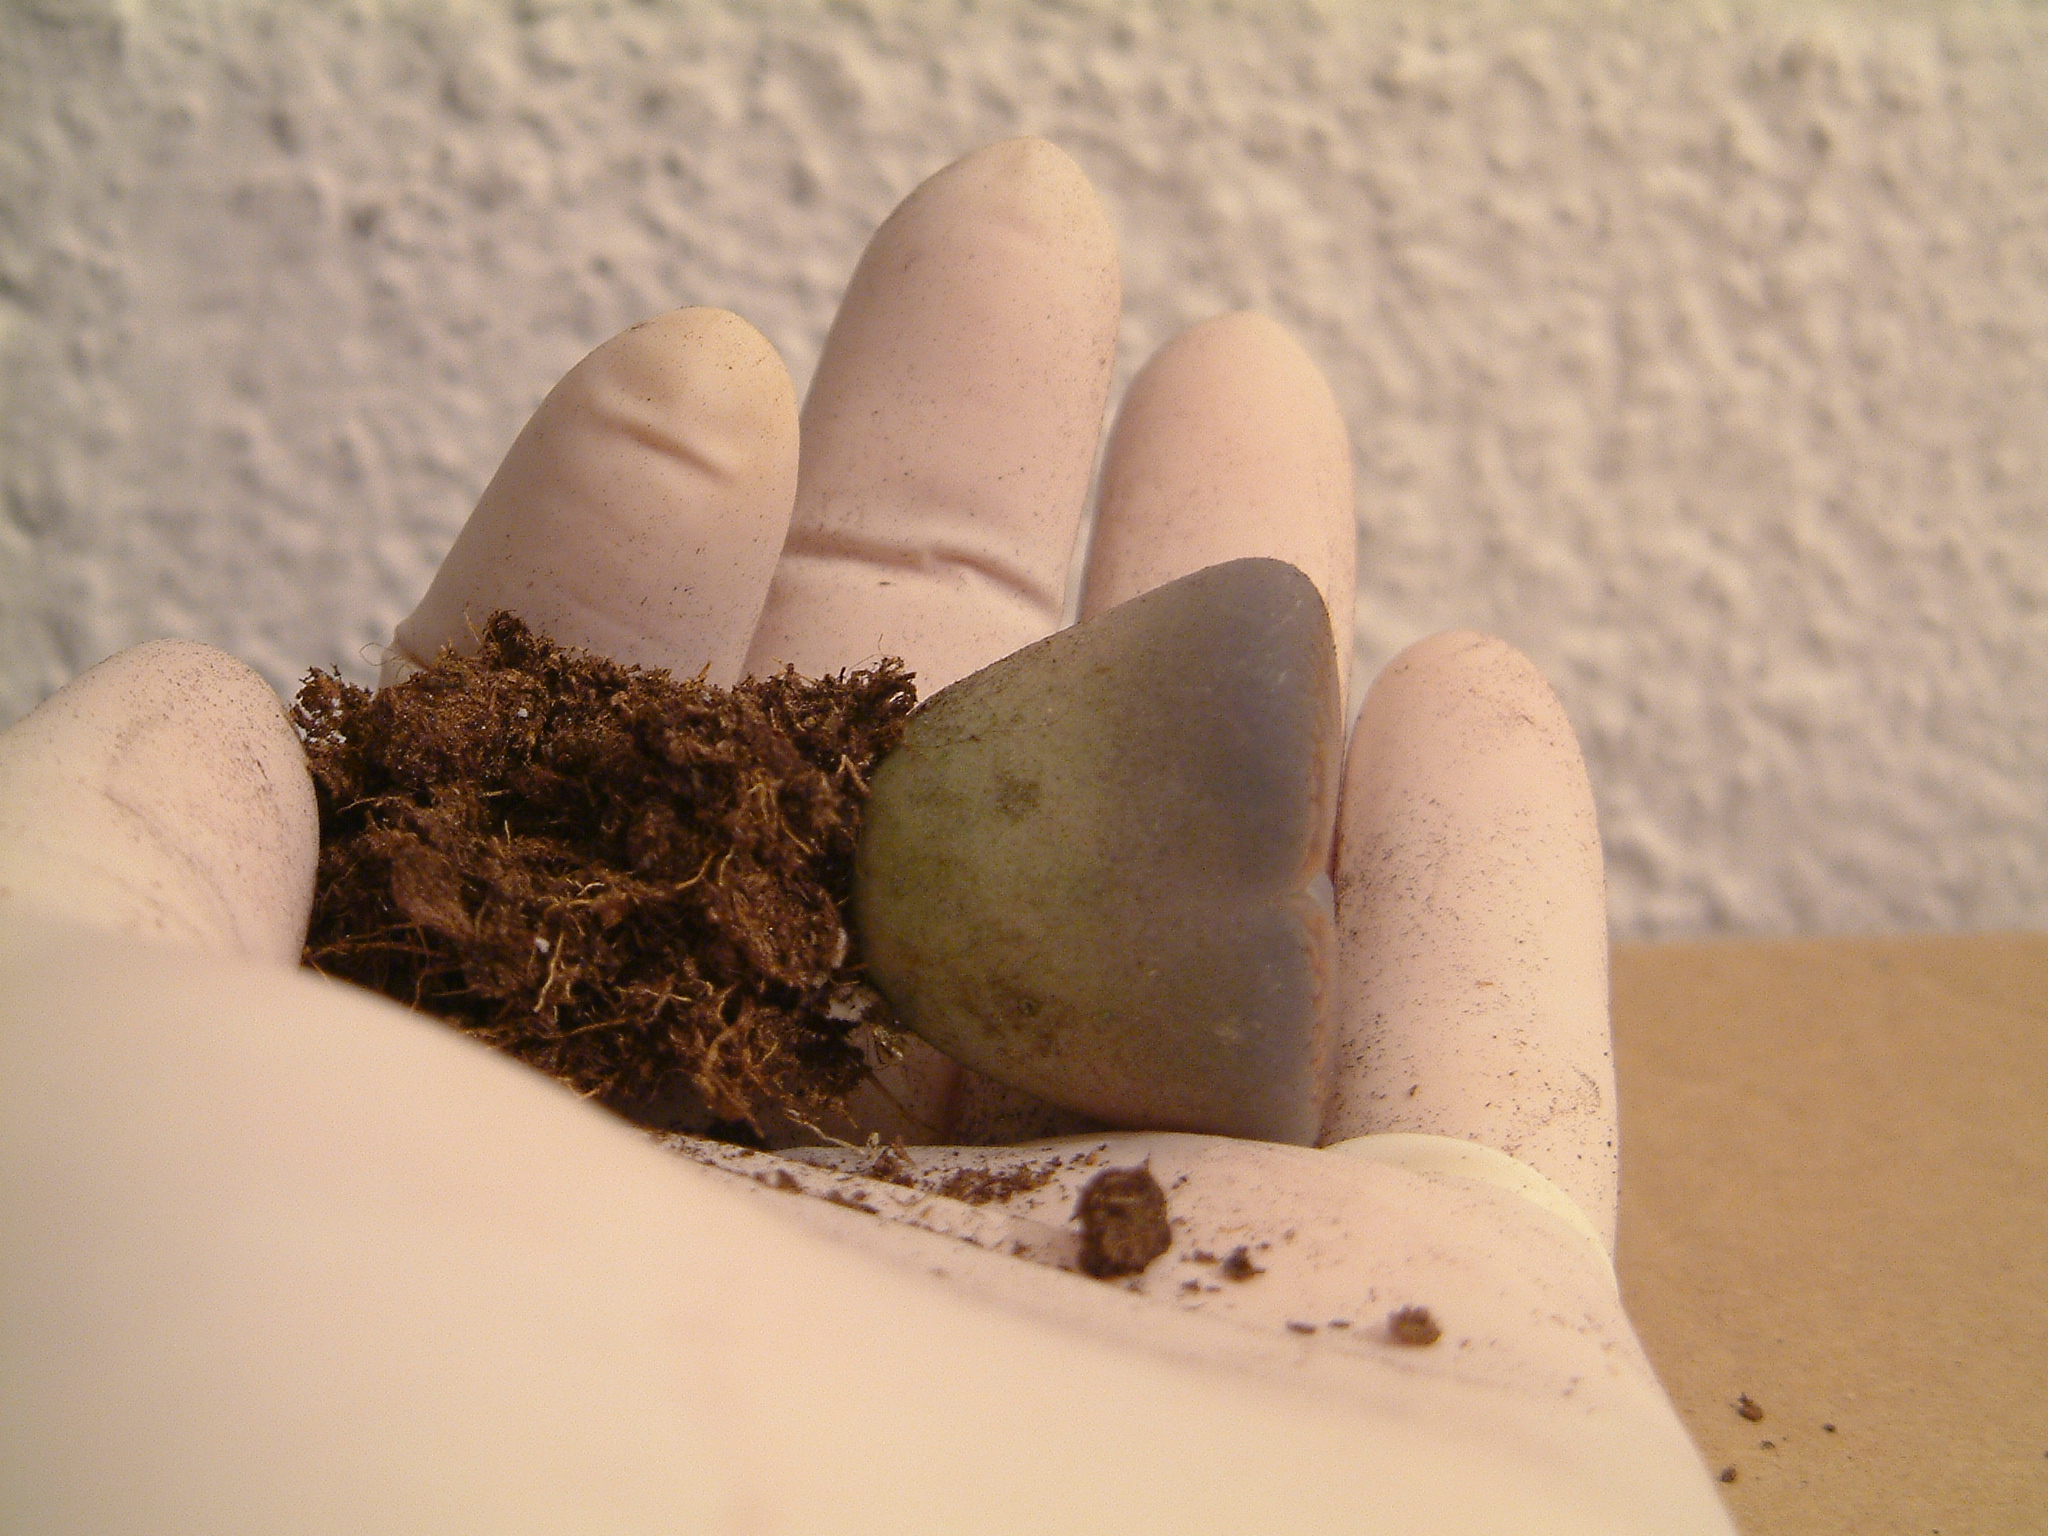 a rock and dirt soil in the palm of someone's hand